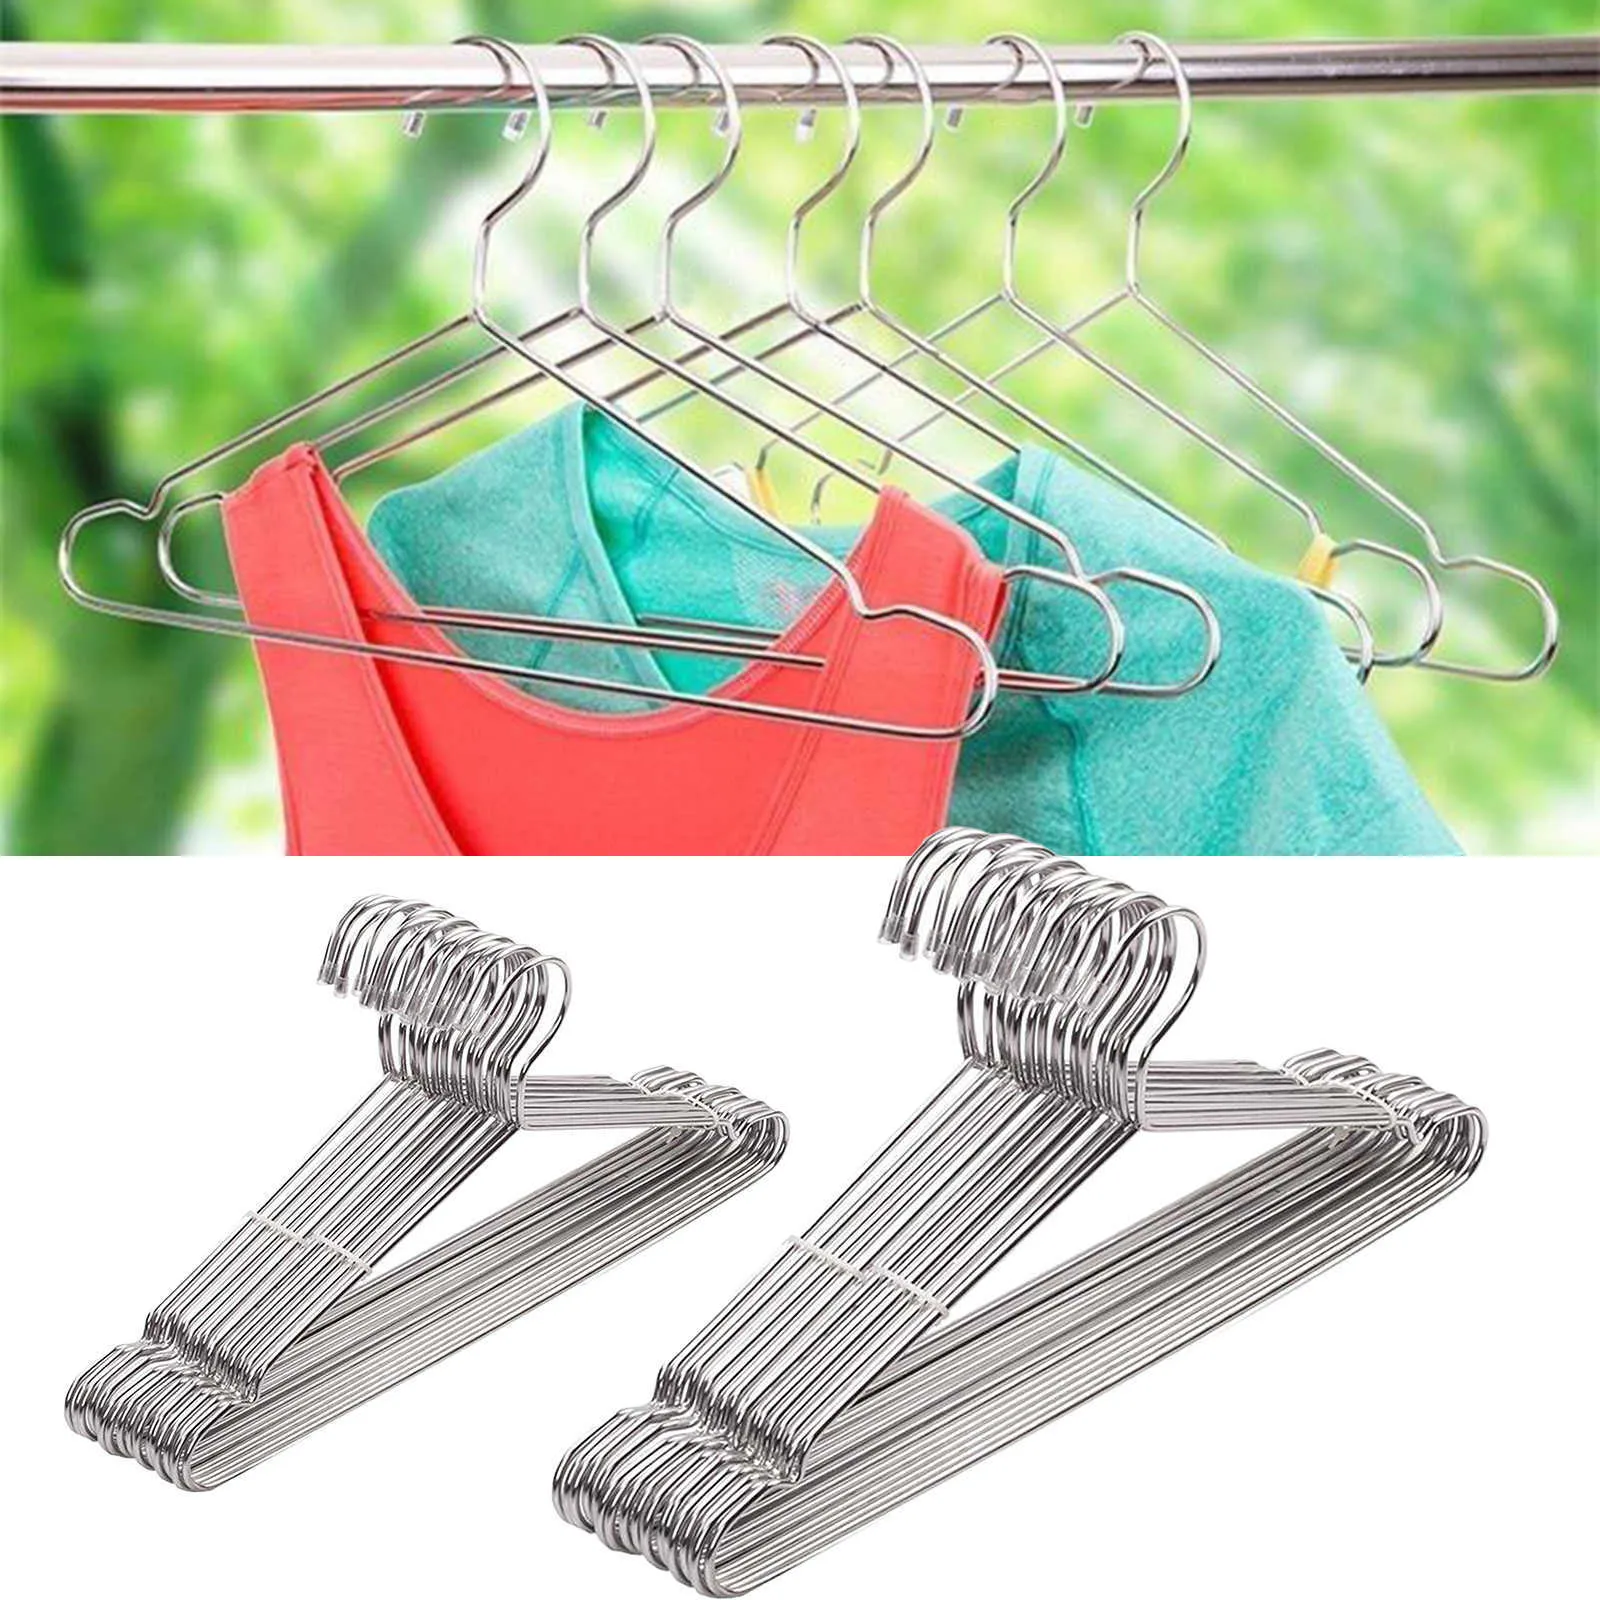 Stainless Steel Clothes Hanger Organizer Strong Metal Coat Suit Hanger Anti-skid